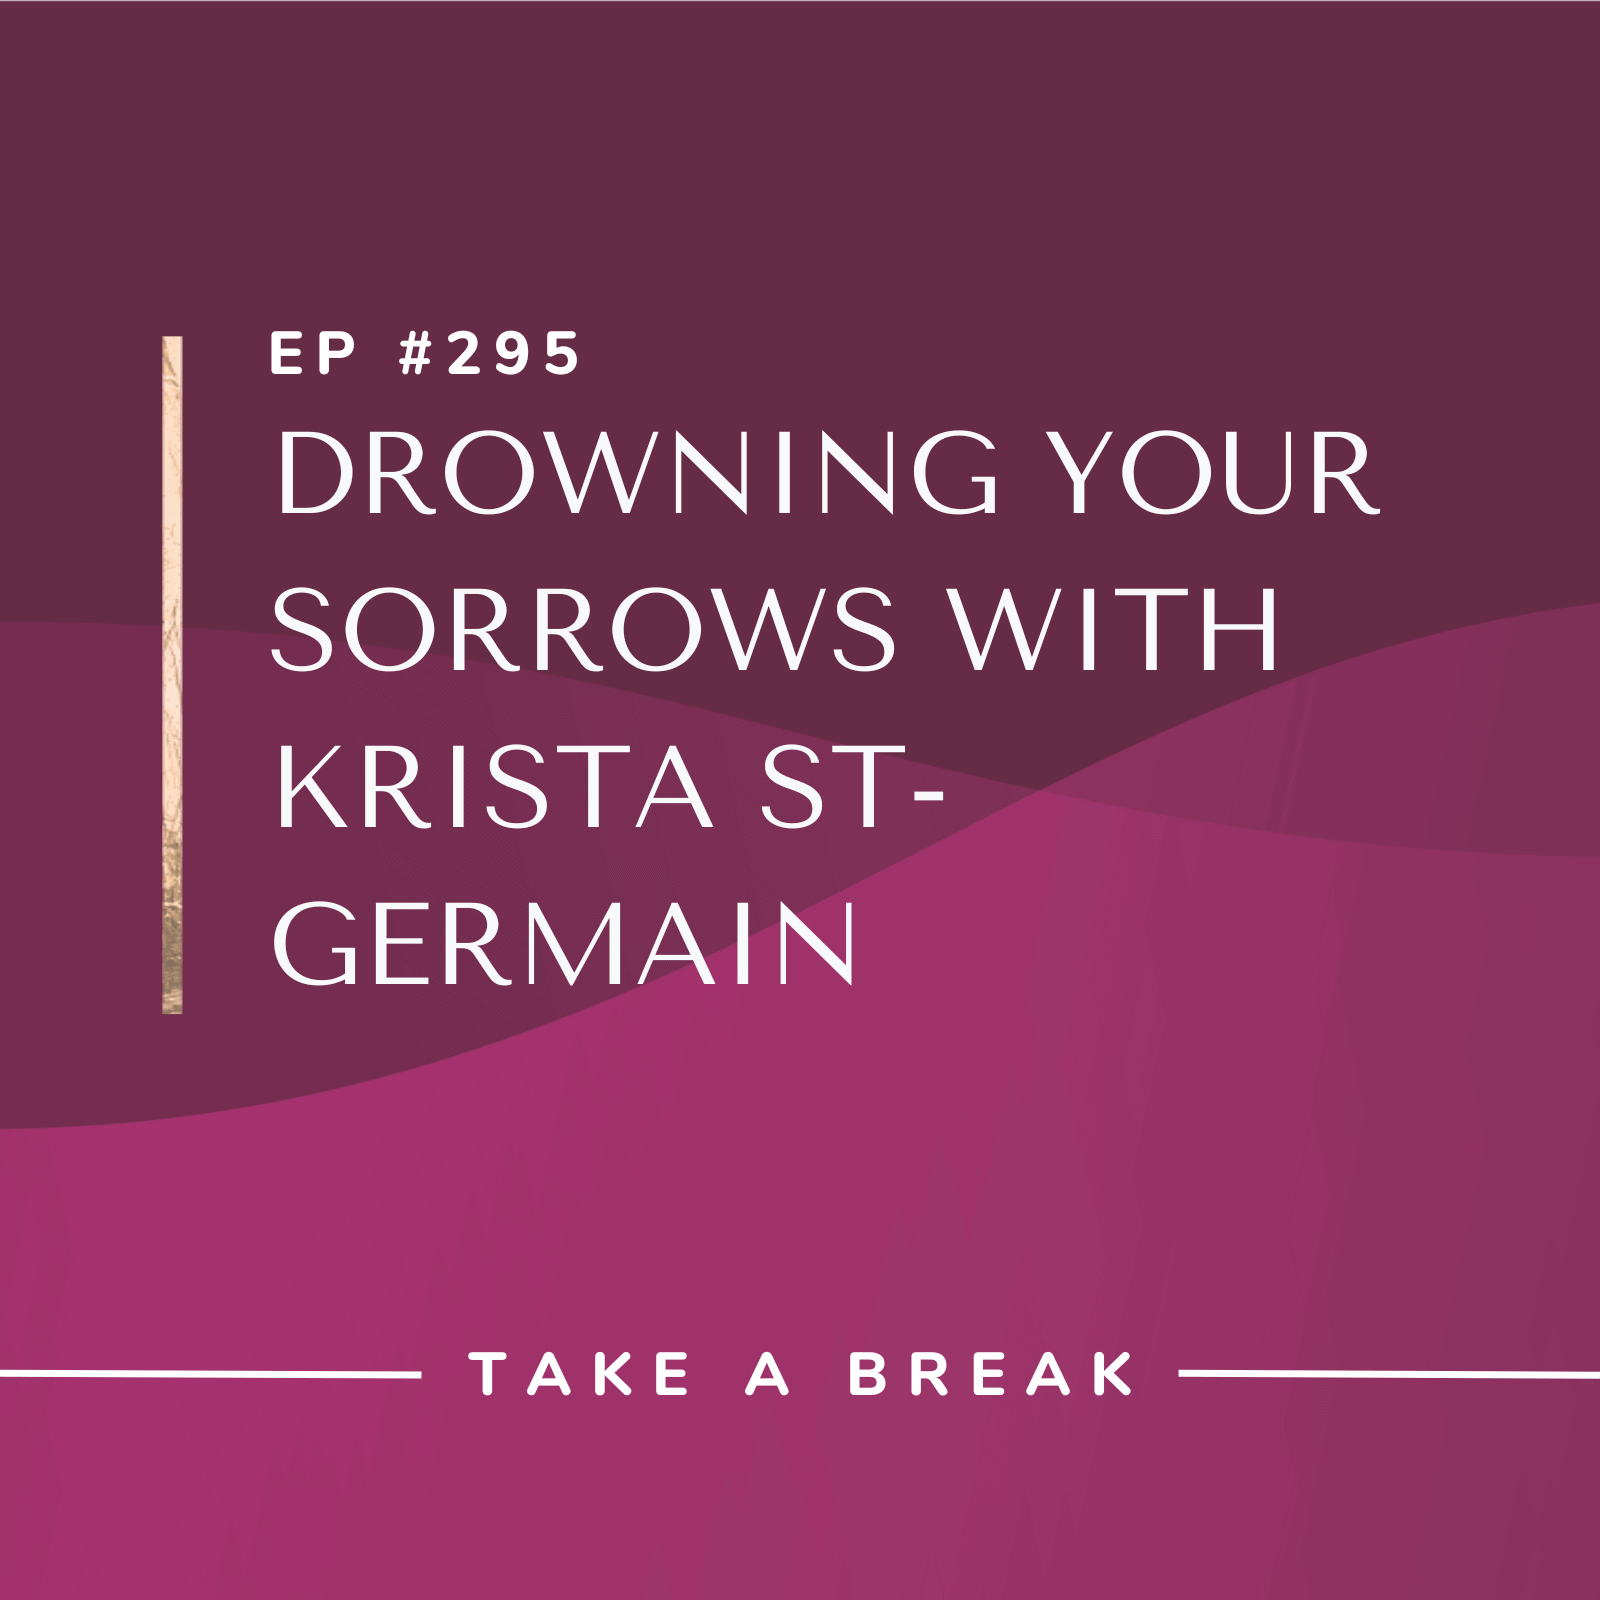 Take A Break from Drinking with Rachel Hart | Drowning Your Sorrows with Krista St-Germain